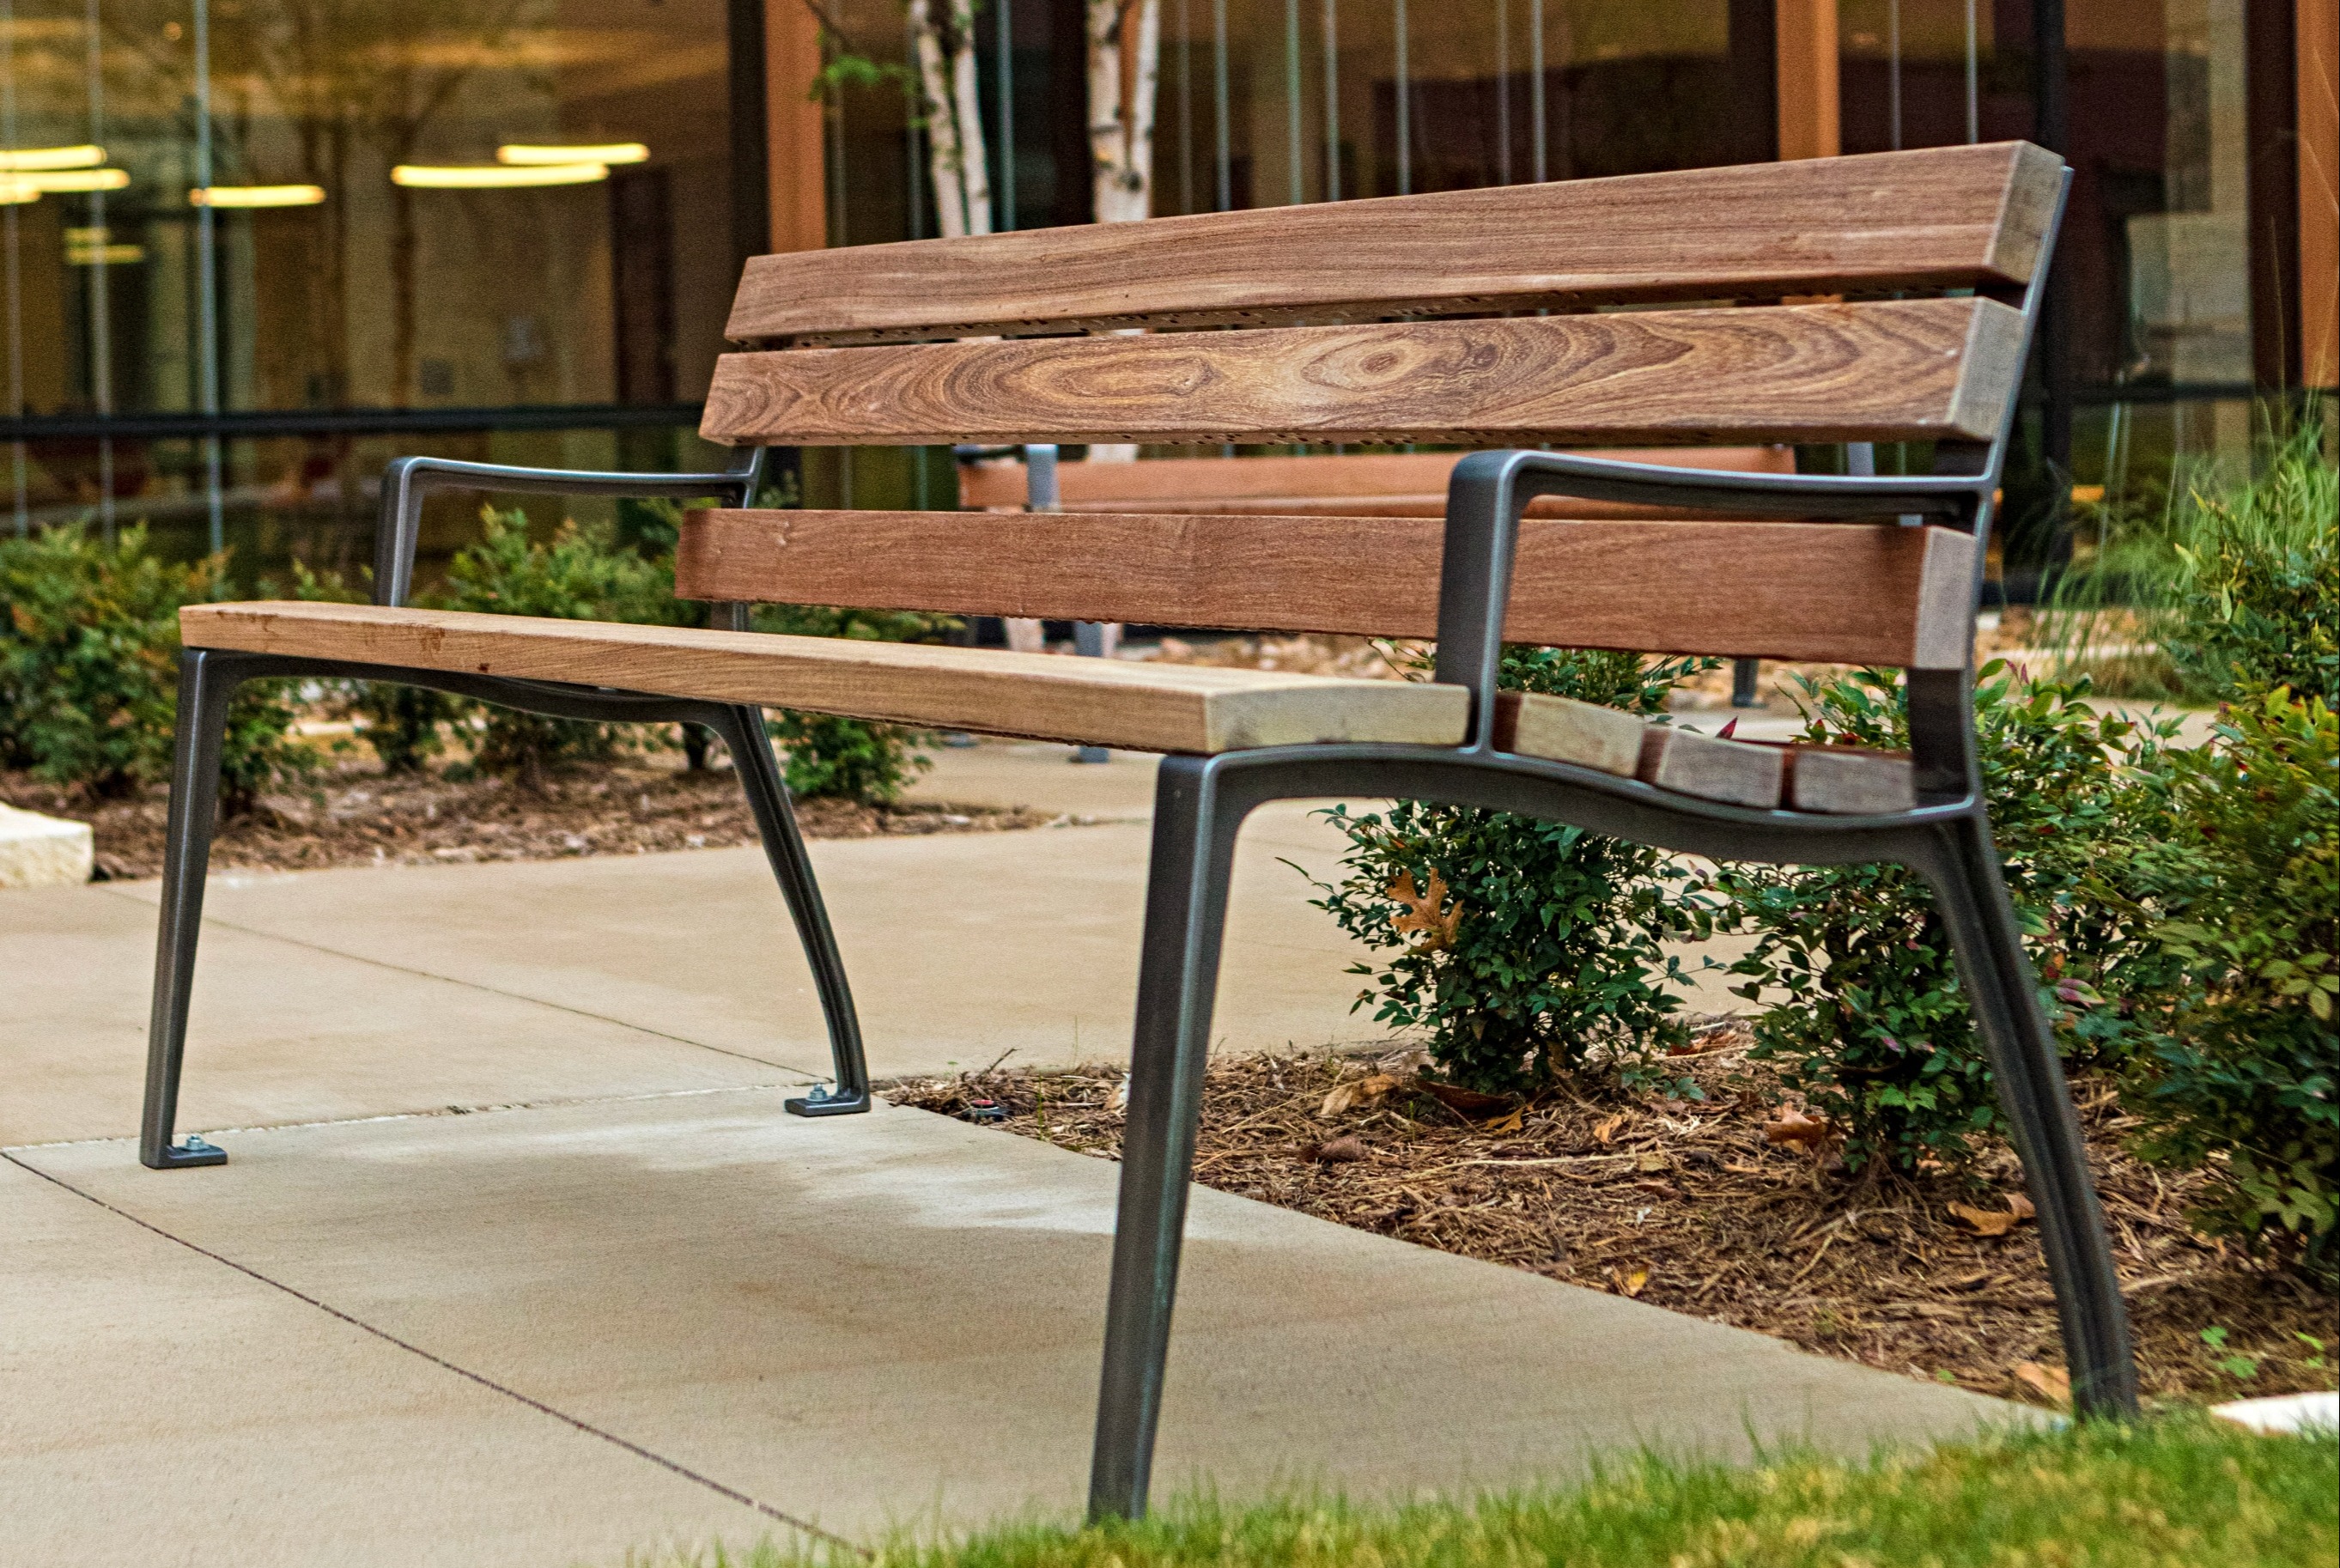 Thomas Steele Midvale Bench With Ipe Wood Seat